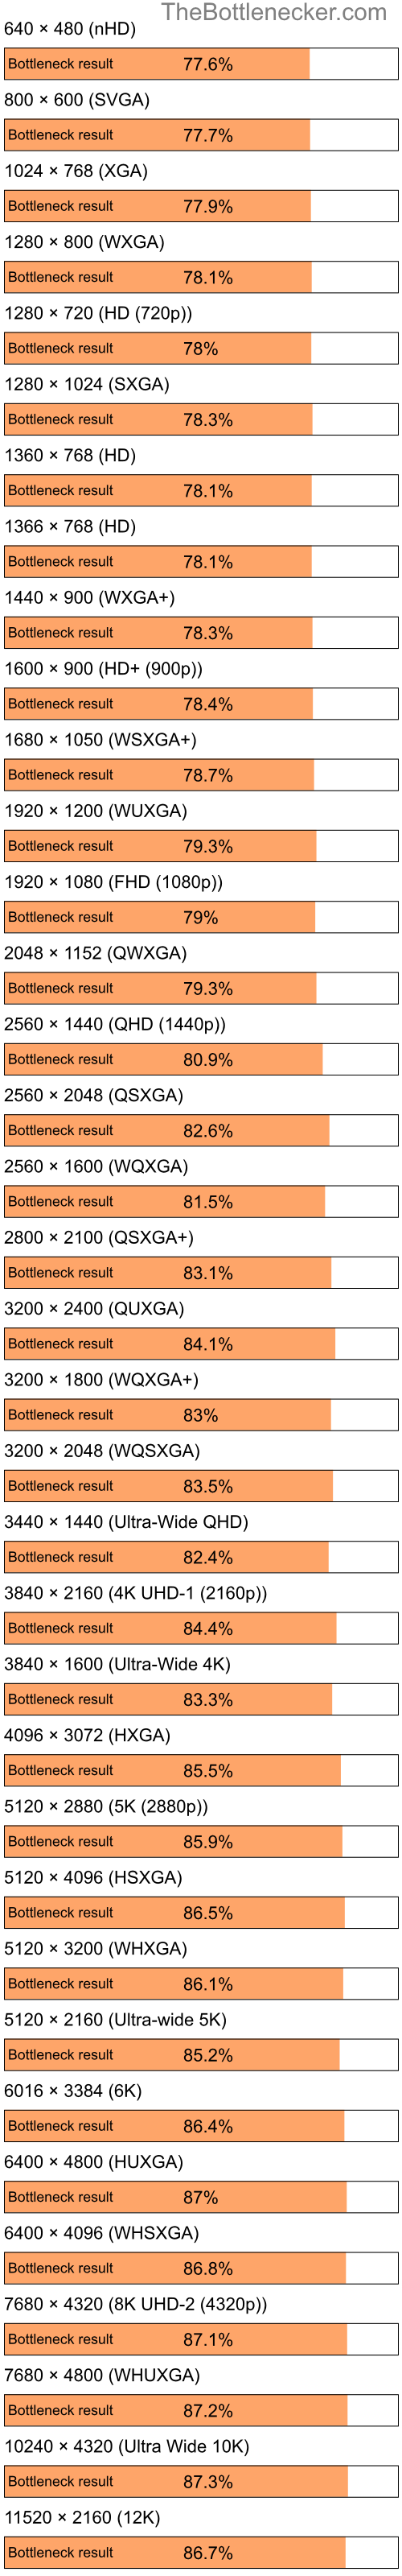 Bottleneck results by resolution for Intel Celeron M 410 and AMD Mobility Radeon HD 2300 in Graphic Card Intense Tasks